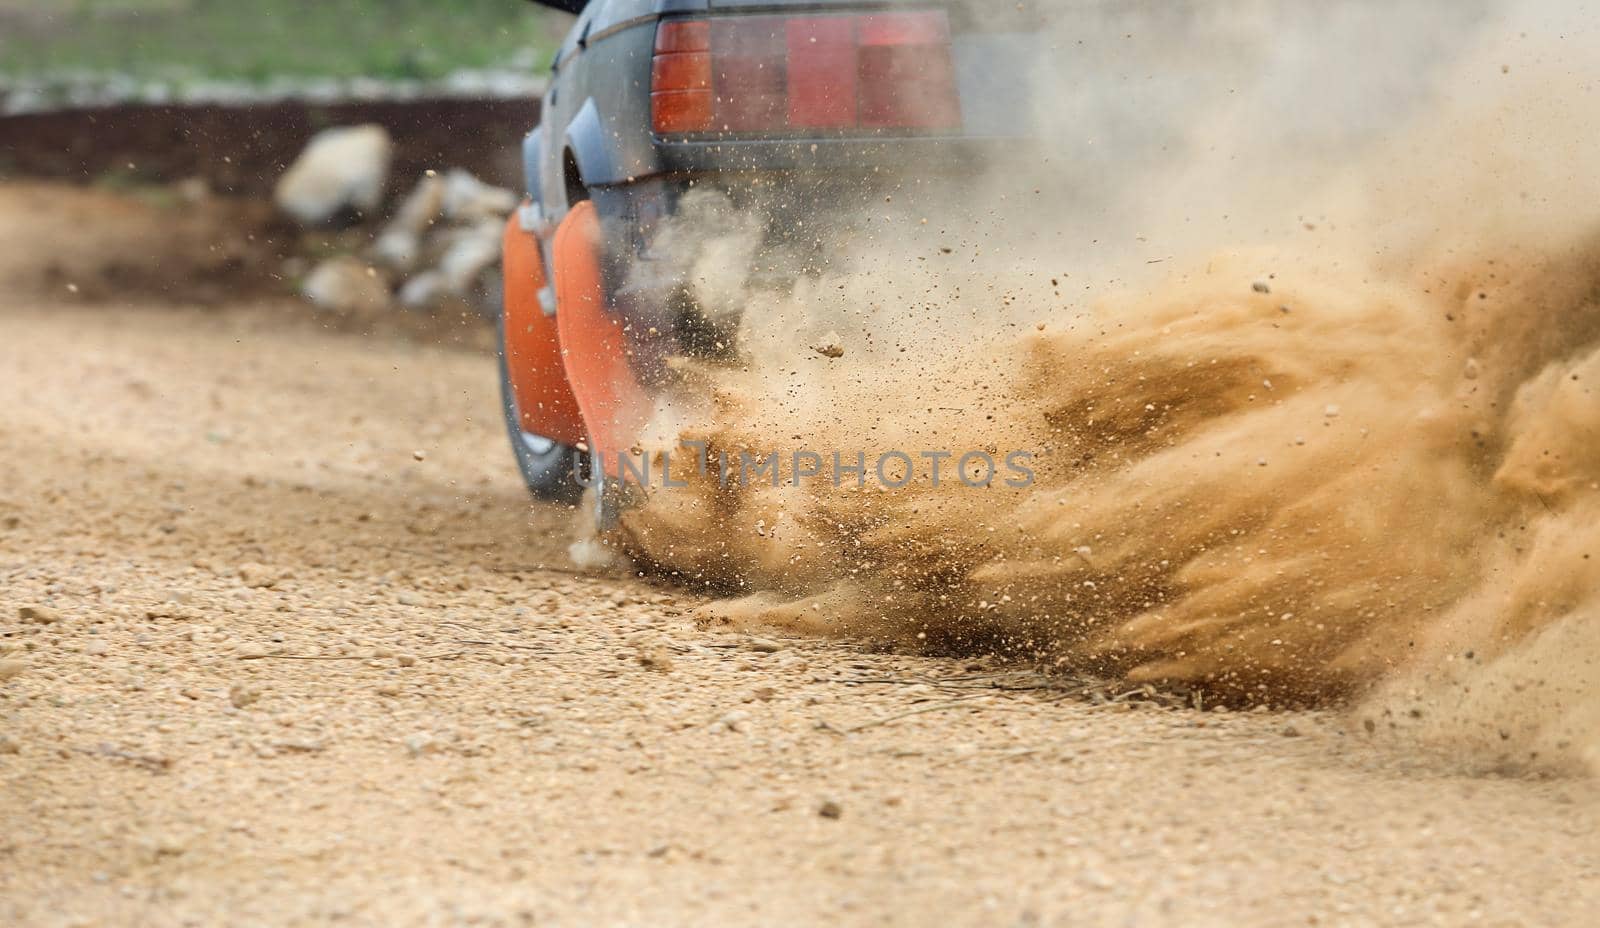 Rally Car turning in dirt track